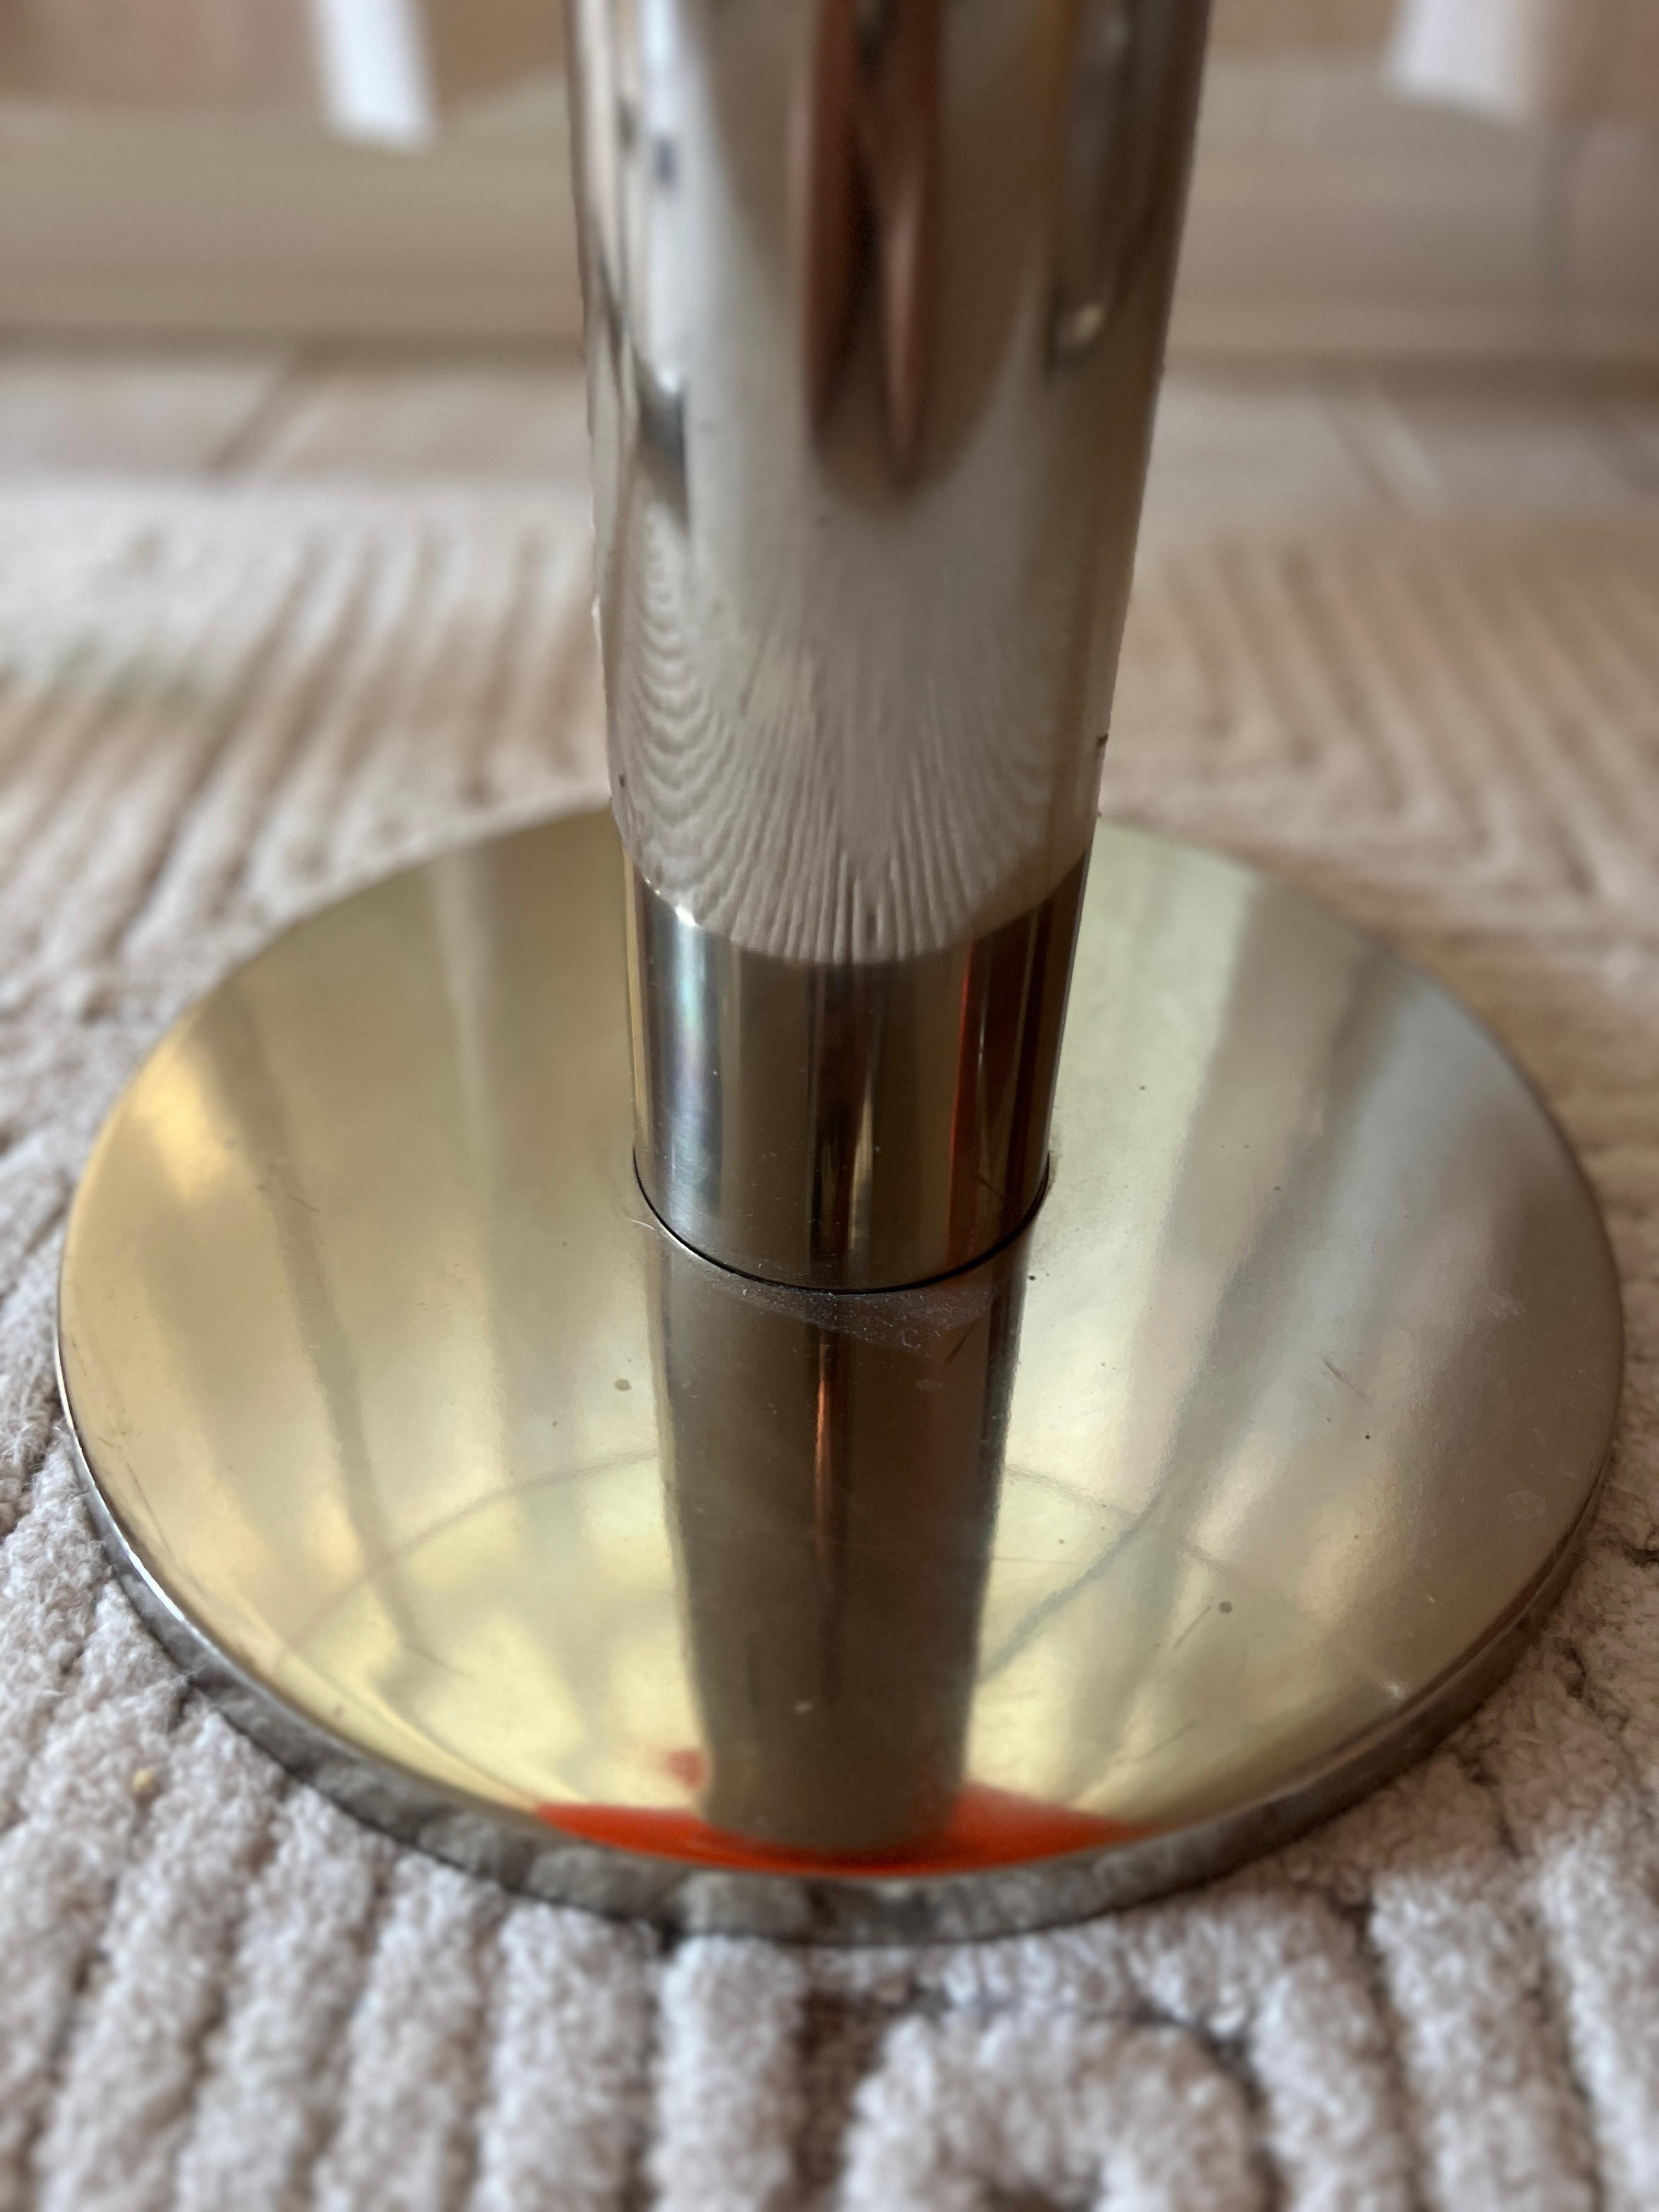 European Vintage glass and chrome side table by Mirodan, made in Belgium circa 1960s